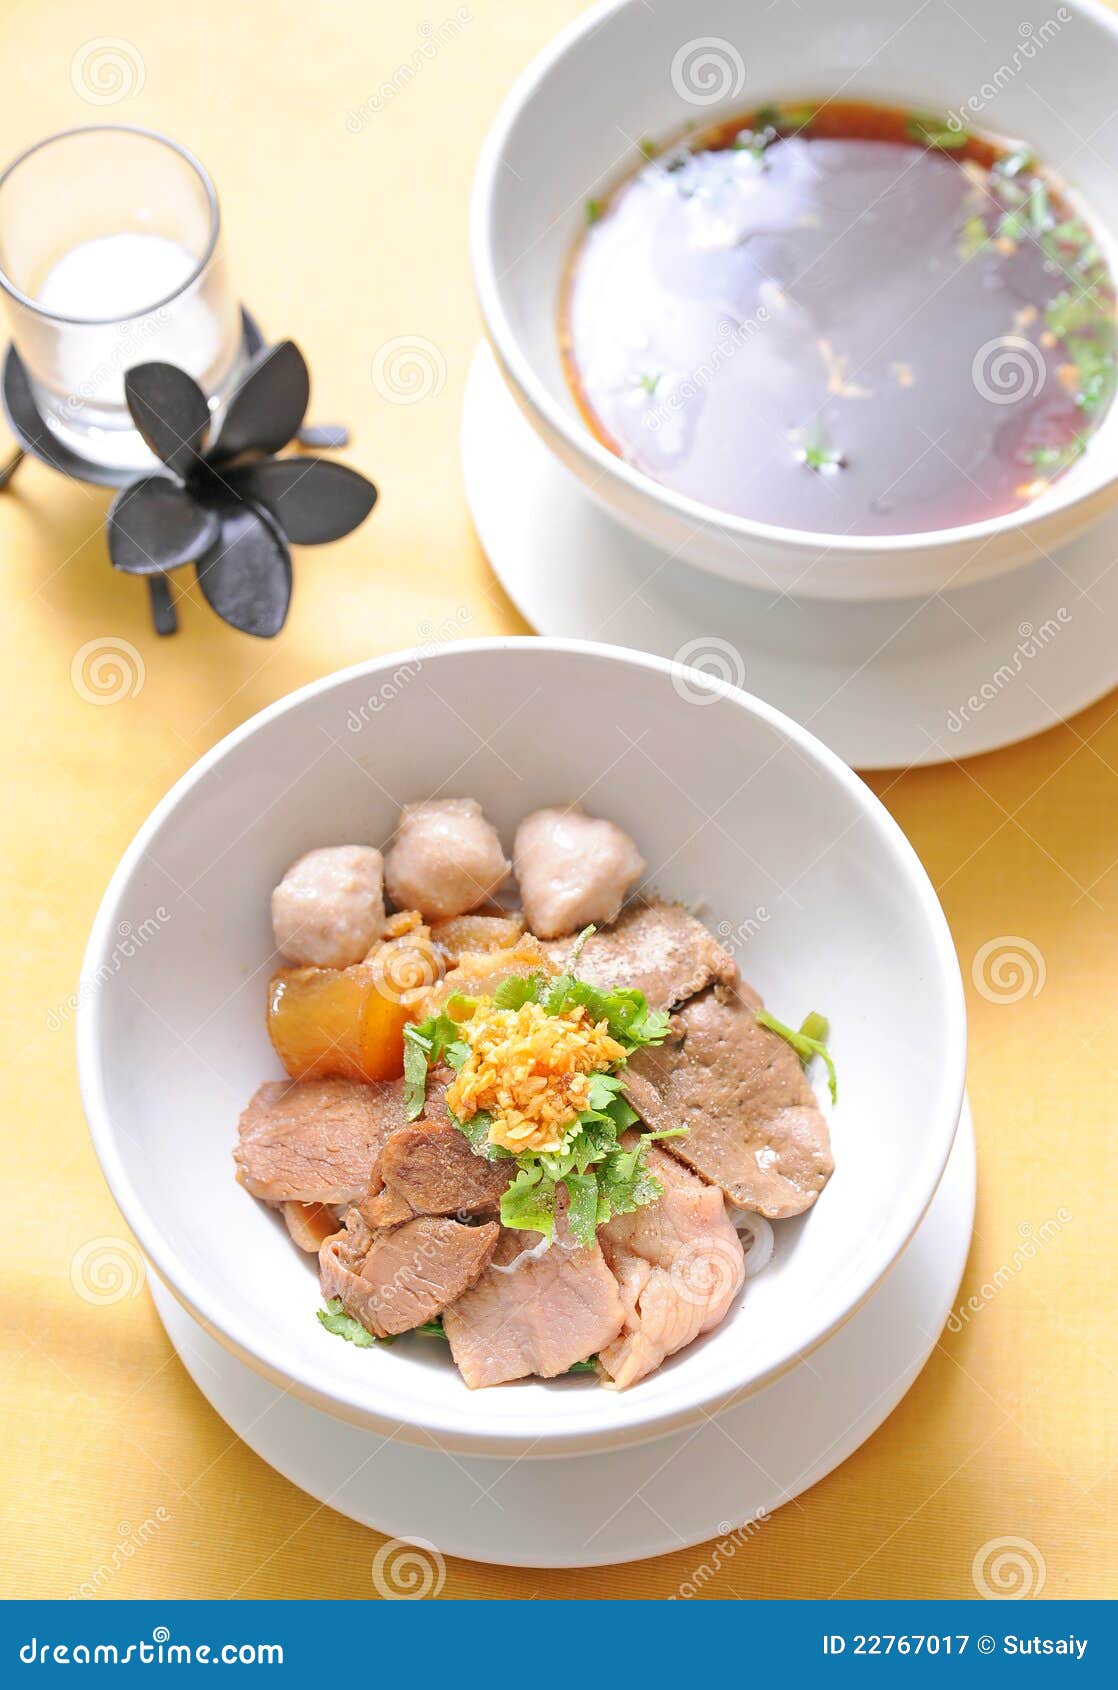 Bowl of Thai Style Beef Noodle Soup Stock Image - Image of beef, cook ...